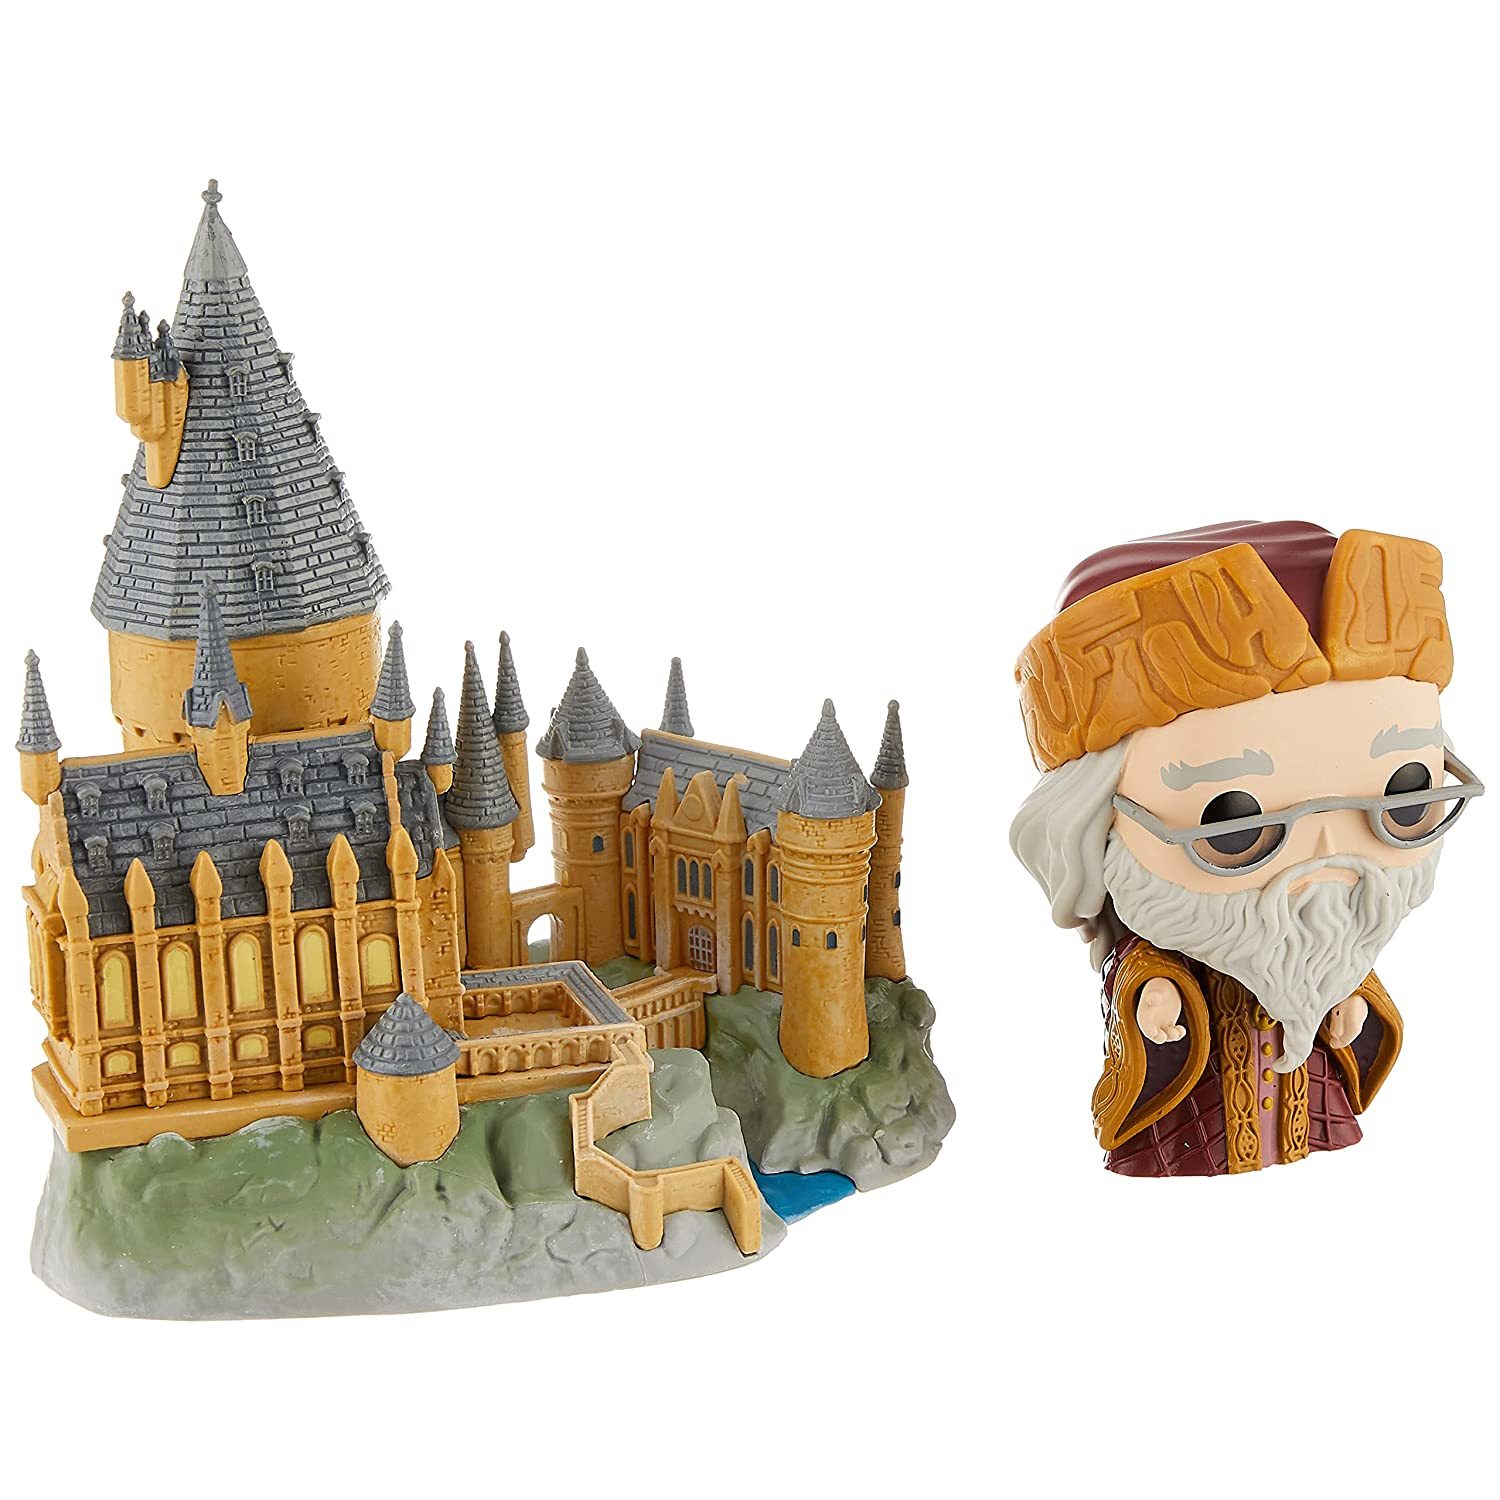 Primary image for Funko Pop! Town: Harry Potter 20th Anniversary - Dumbledore with Hogwarts